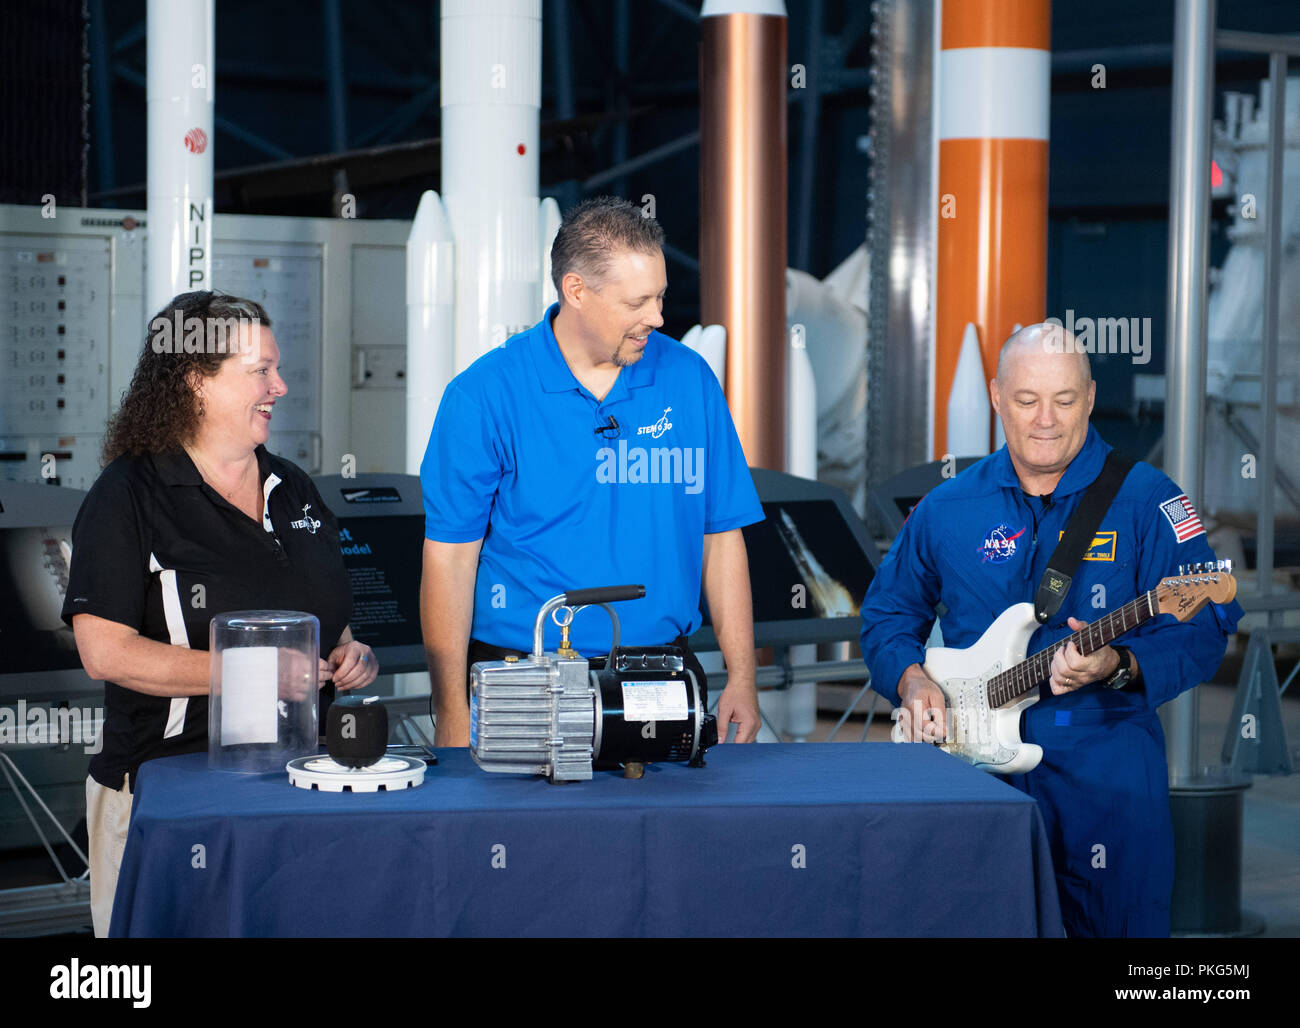 Chantilly, VA, USA. 12th Sep, 2018. NASA astronaut Scott Tingle plays an electric guitar during a taping of STEM in 30 with Beth Wilson and Marty Kelsey, Wednesday, Sept. 12, 2018 at the Smithsonian National Air and Space Museum's Steven F. Udvar-Hazy Center in Chantilly, Va. Tingle spent 168 days onboard the International Space Station as part of Expeditions 54 and 55. Photo Credit: (NASA/Joel Kowsky) NASA via globallookpress.com Credit: Nasa/Russian Look/ZUMA Wire/Alamy Live News Stock Photo